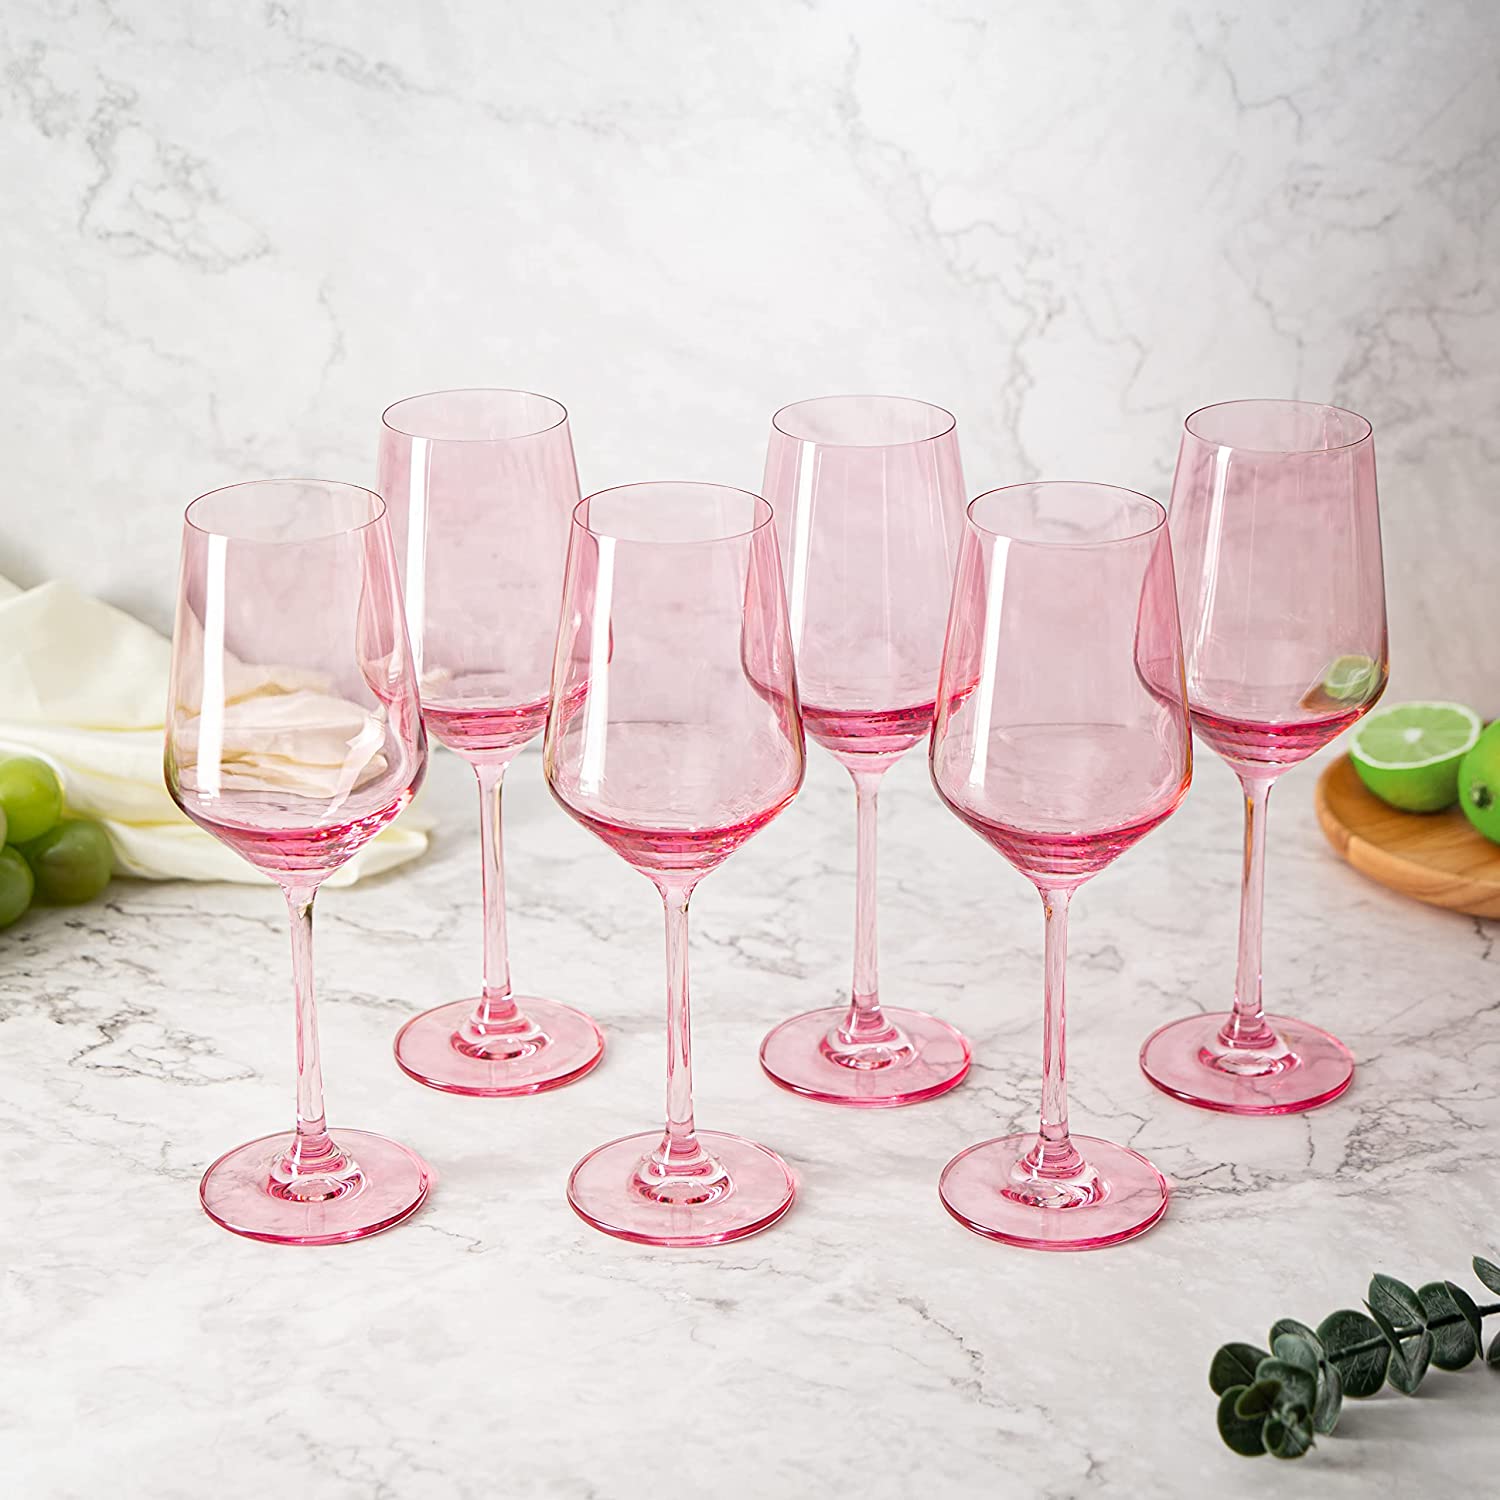 Pink Crystal Wine Glass Set of 6 - Hand-Blown Long Stem Wine Glasses,  Unique Wine Glasses Gift For C…See more Pink Crystal Wine Glass Set of 6 